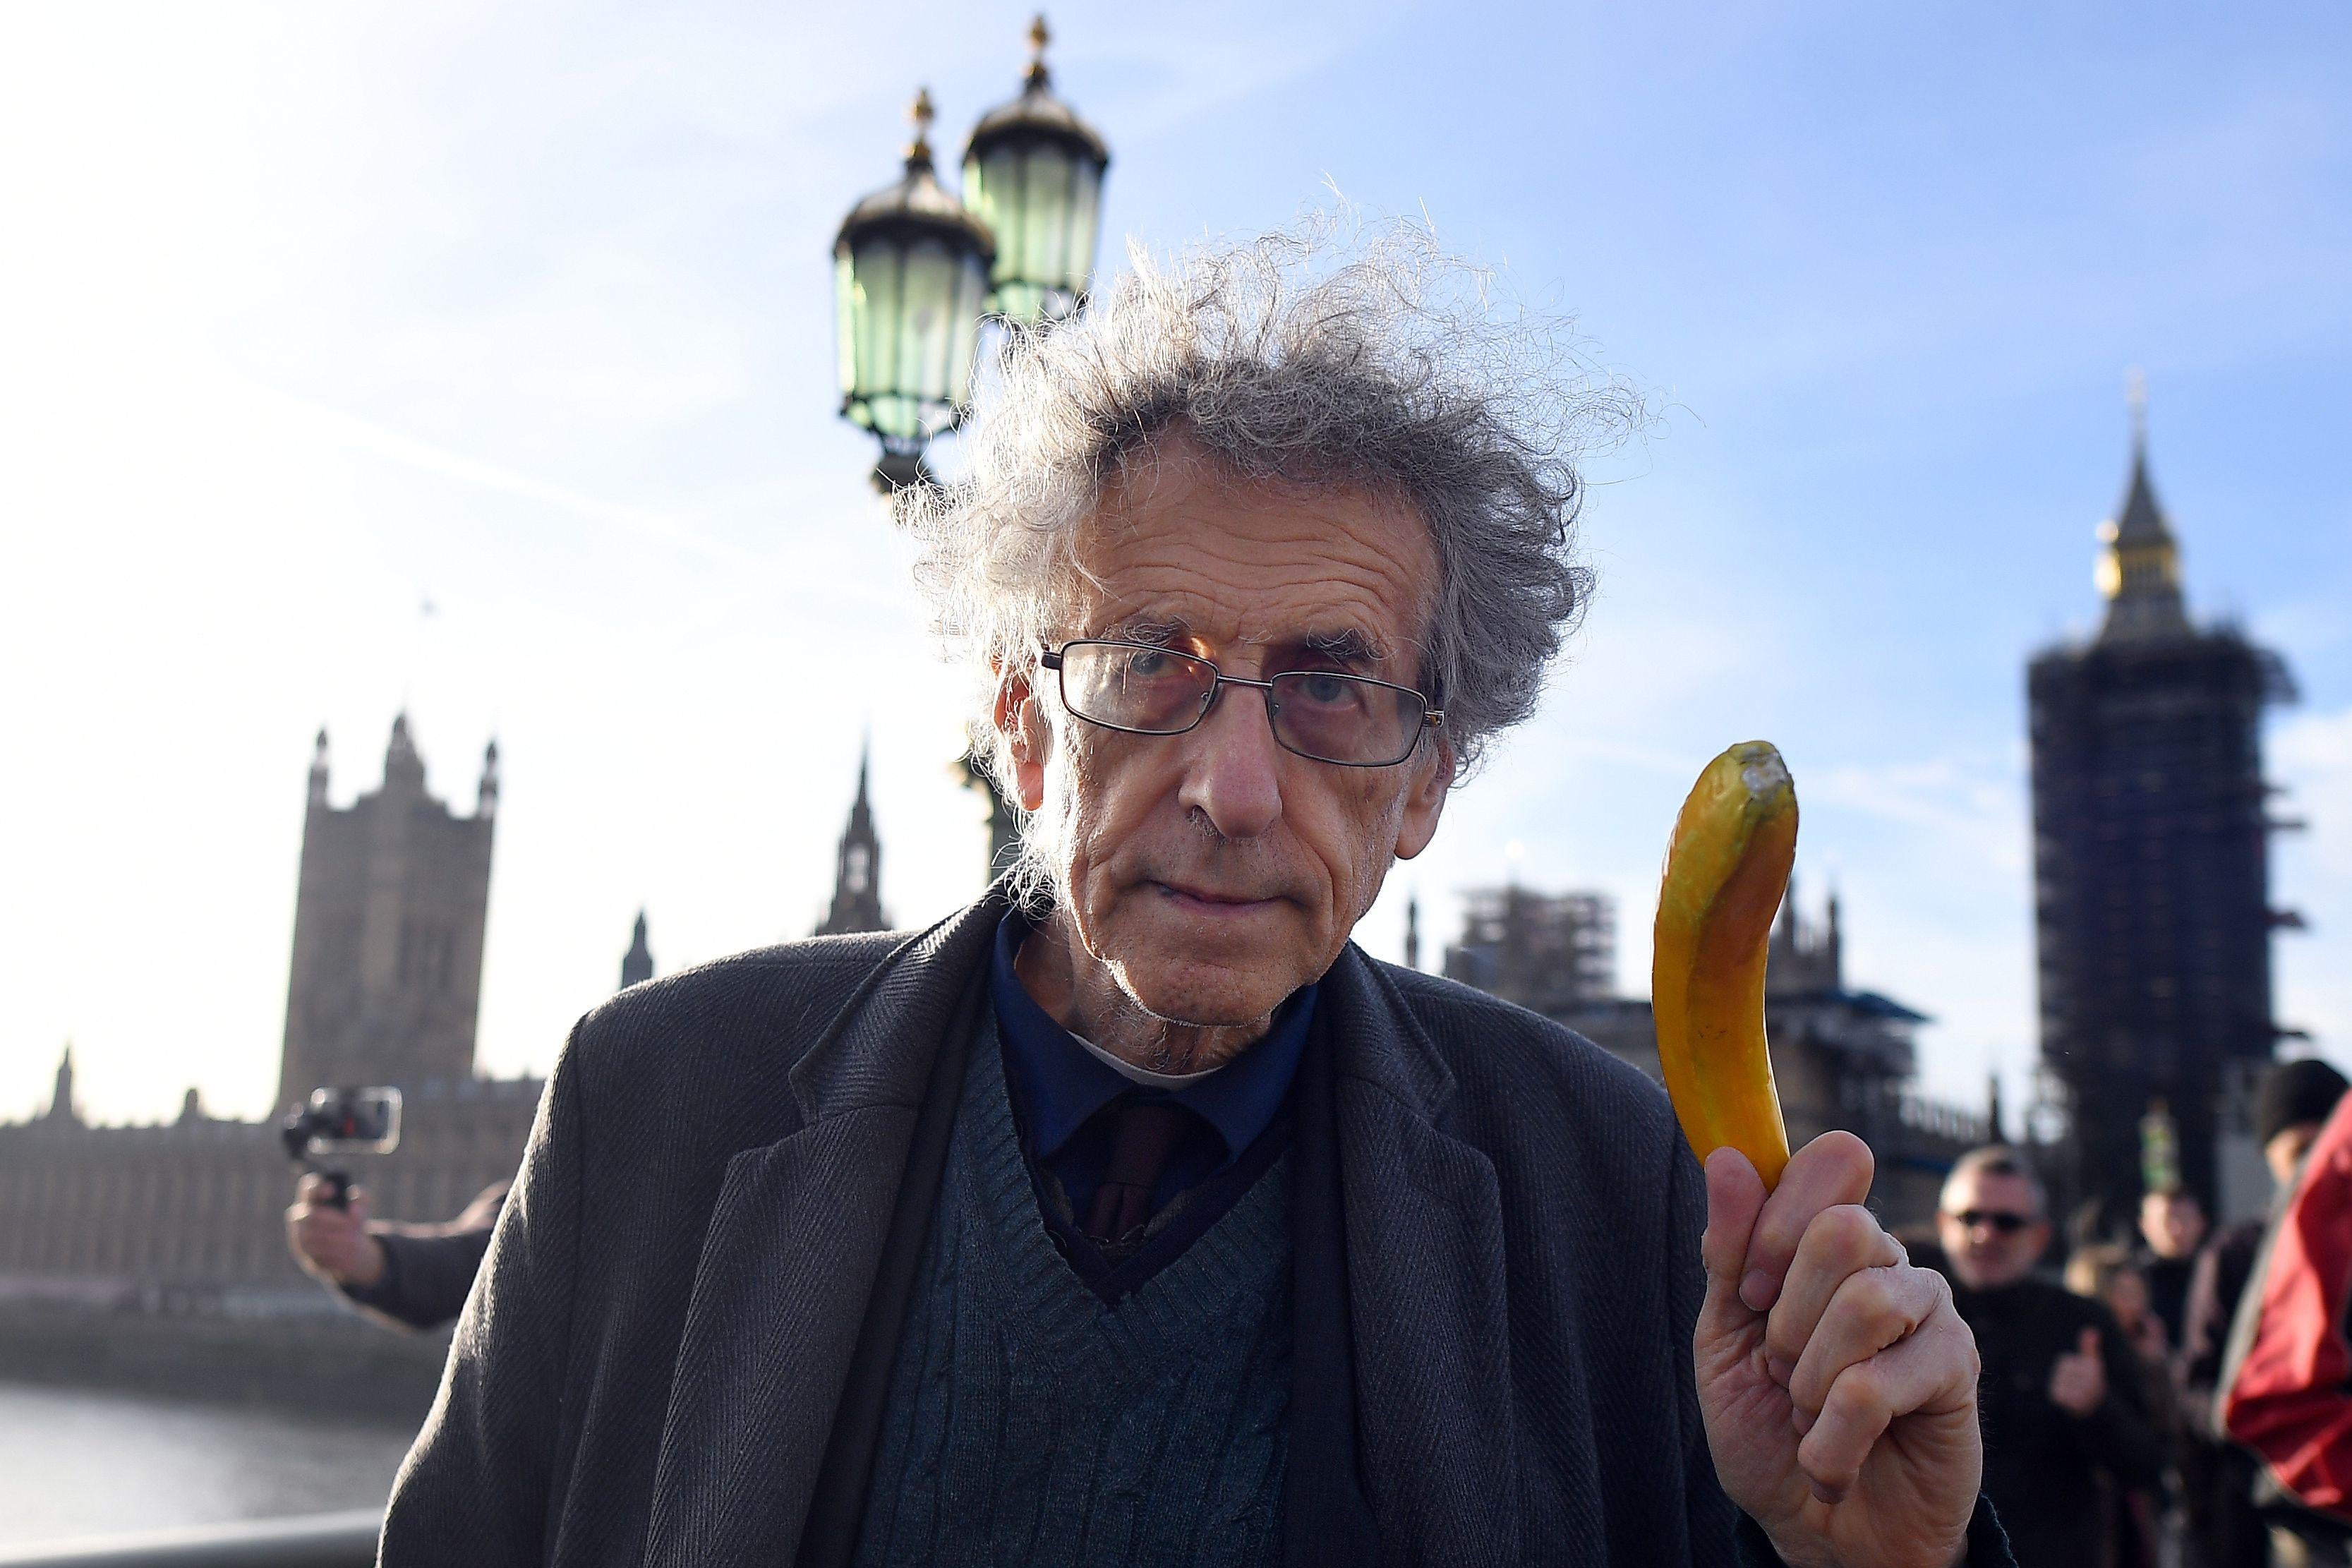 An older man with wild hair holds up a banana while standing outside in London.